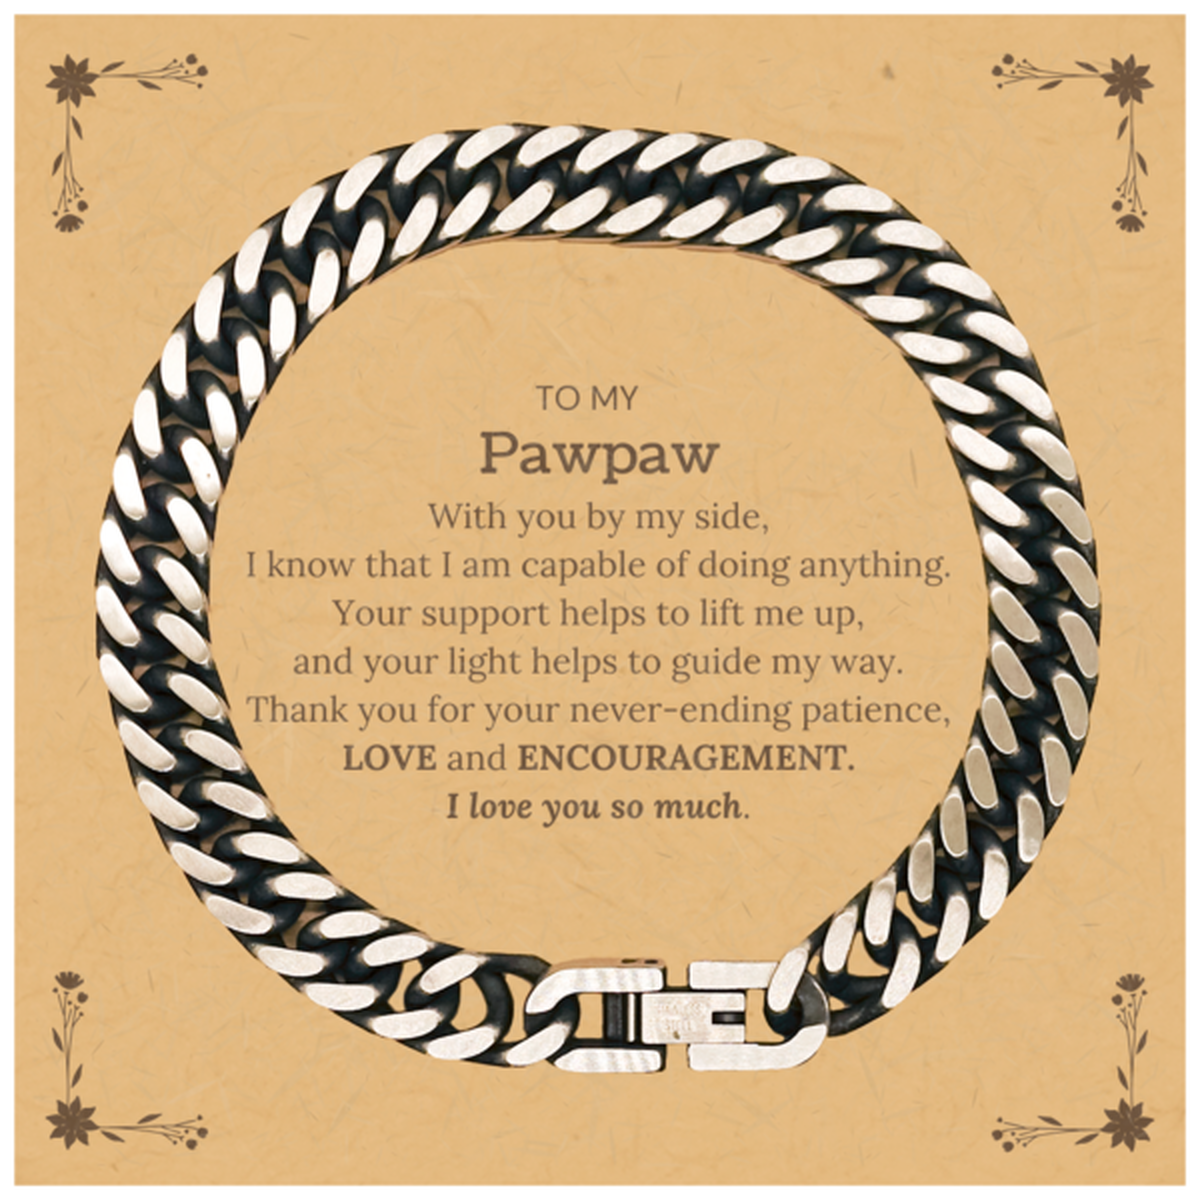 Appreciation Pawpaw Cuban Link Chain Bracelet Gifts, To My Pawpaw Birthday Christmas Wedding Keepsake Gifts for Pawpaw With you by my side, I know that I am capable of doing anything. I love you so much